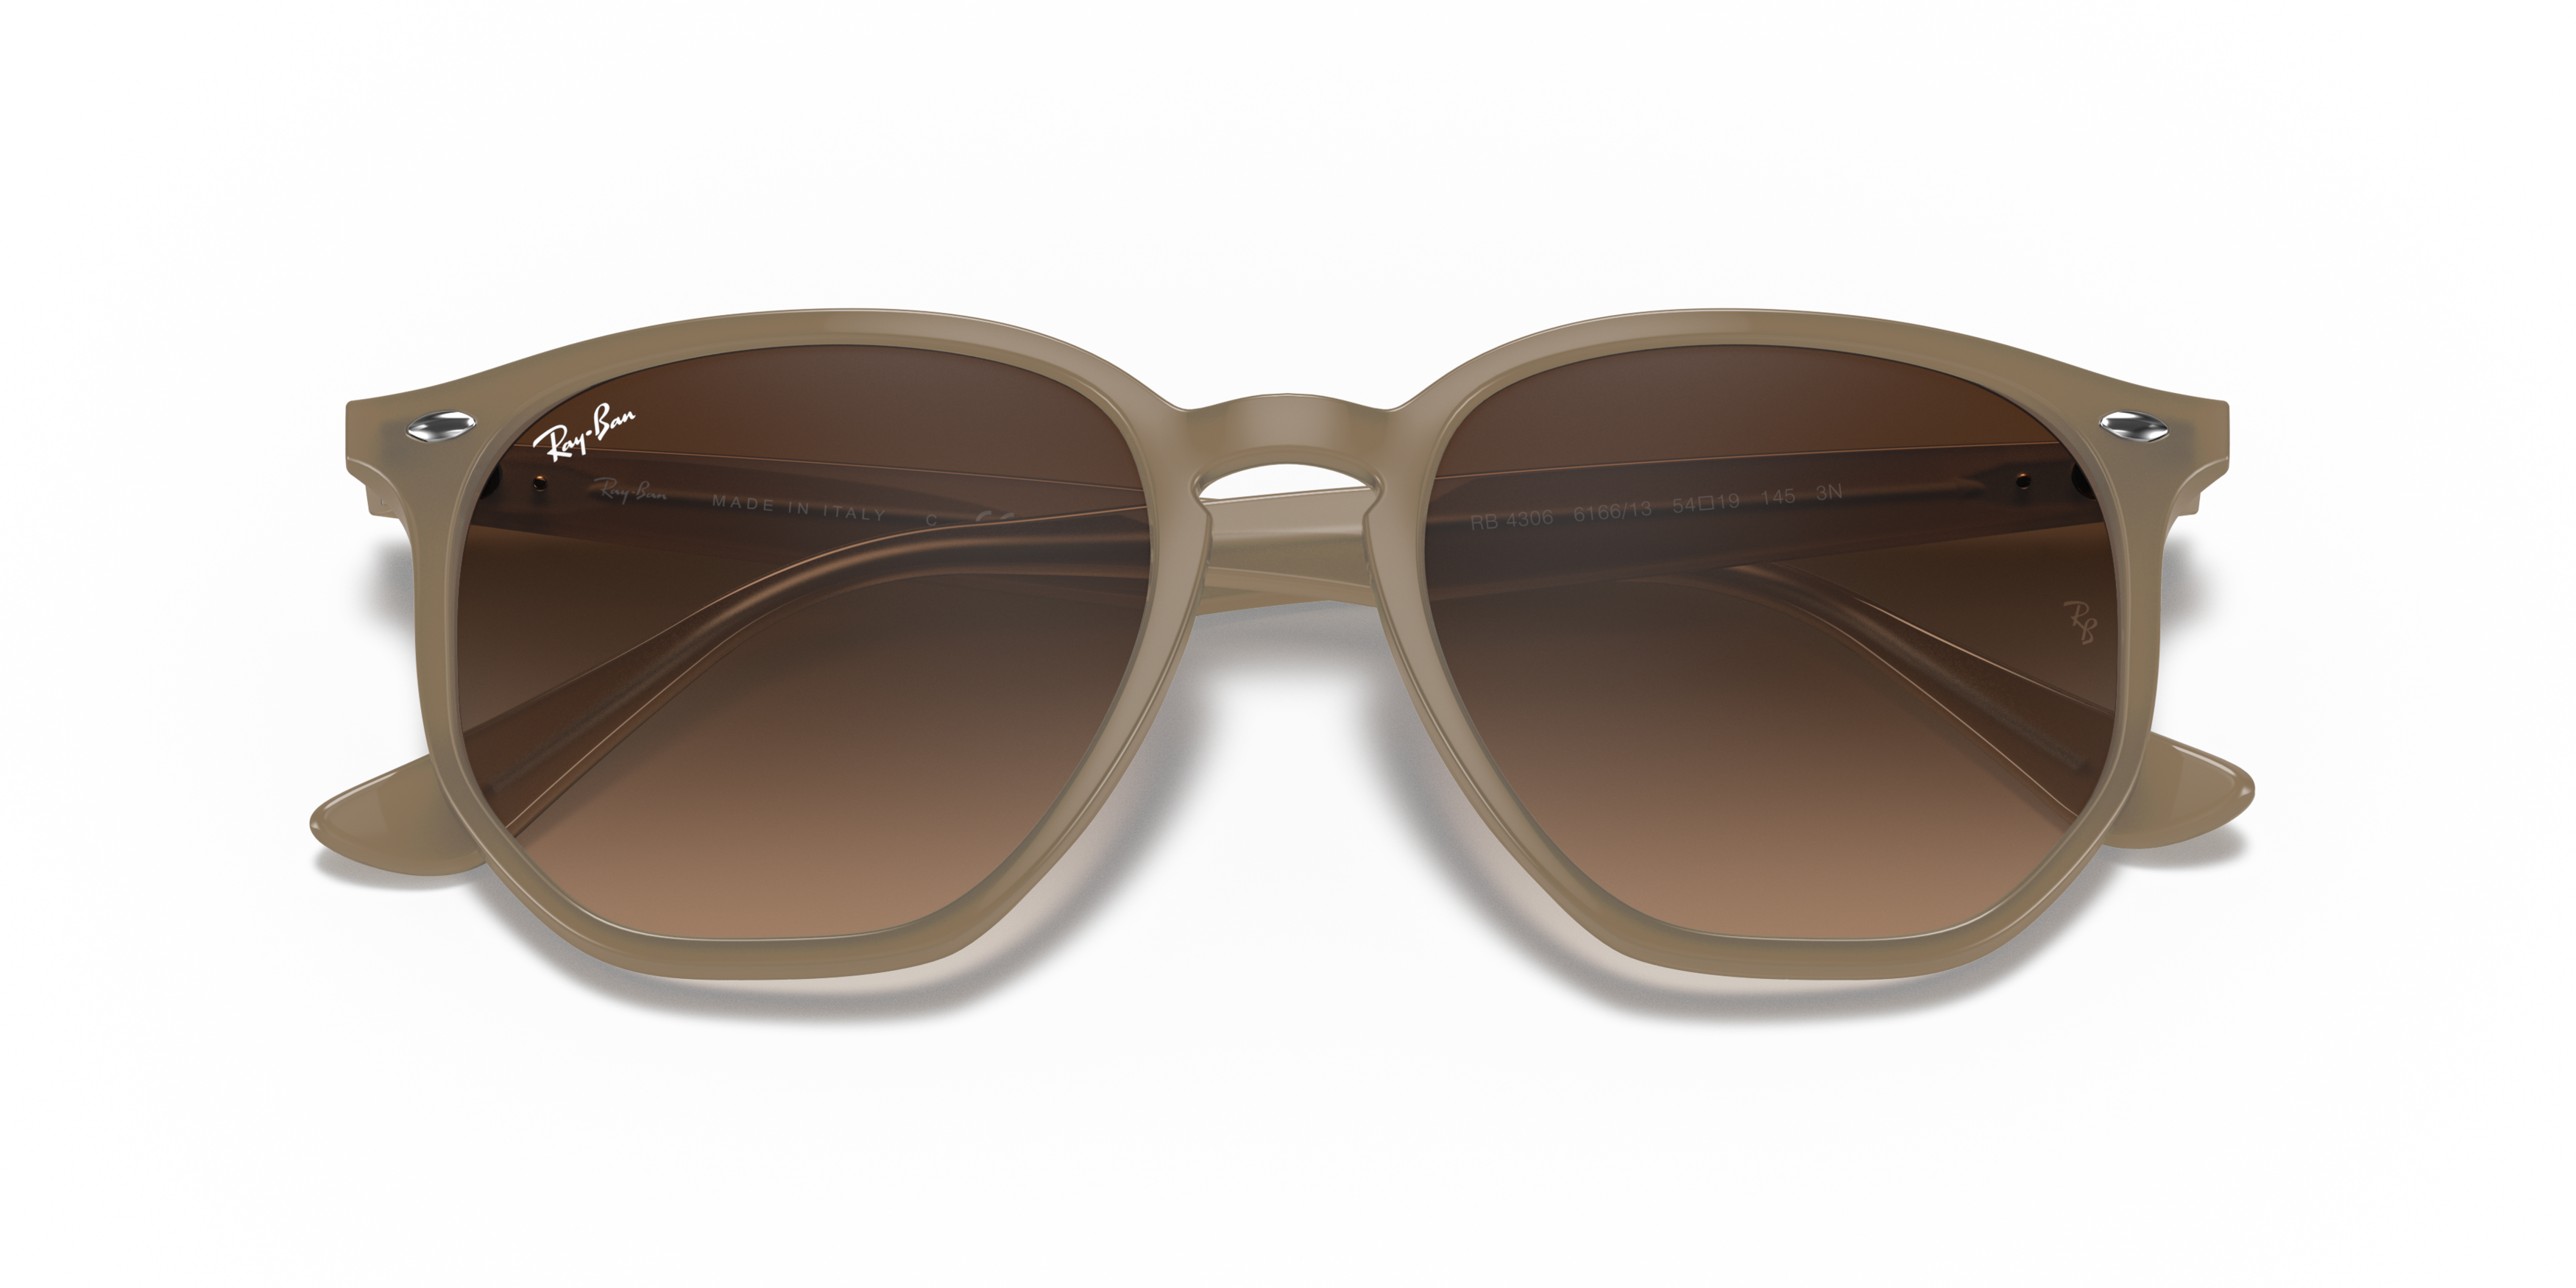 Folded Ray-Ban RB 4306 Sunglasses Brown / Transparent, Tortoise Shell